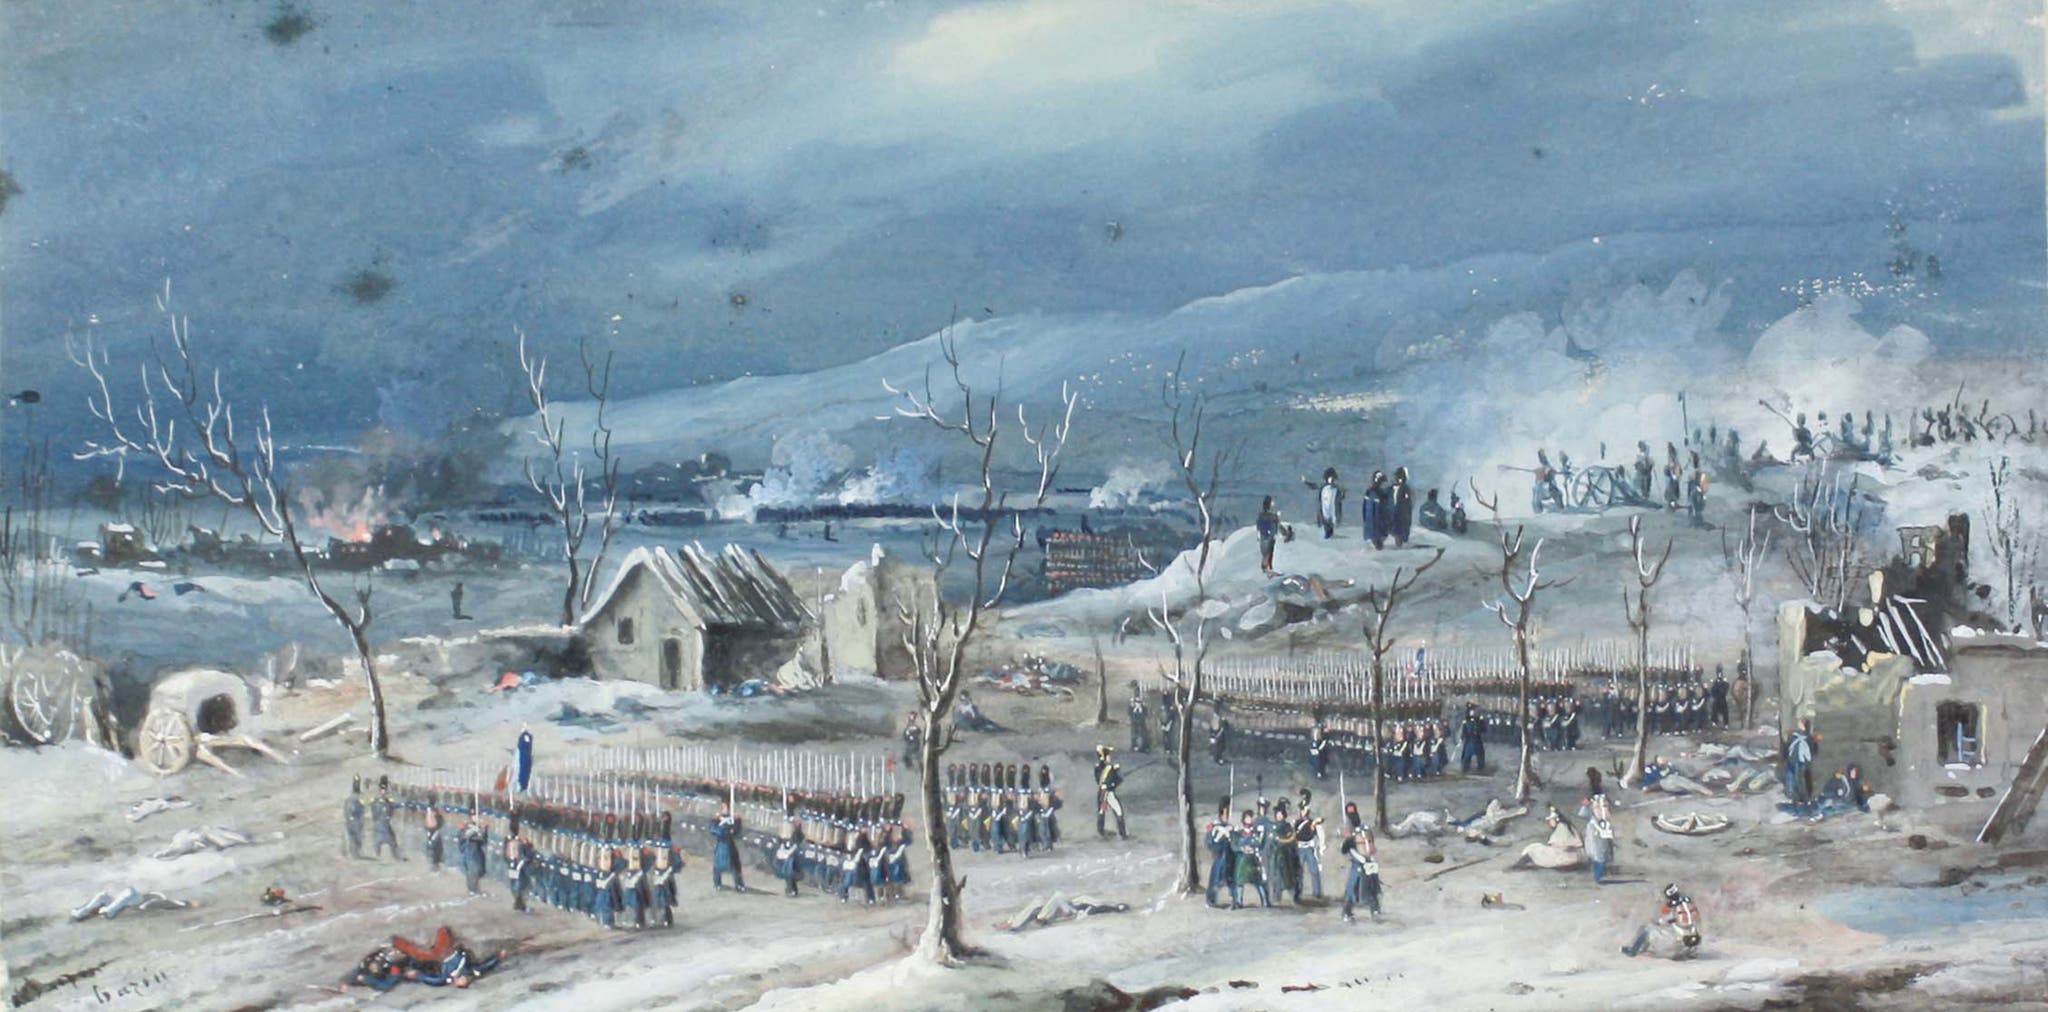 A brutally cold battle in Russia during the French invasion